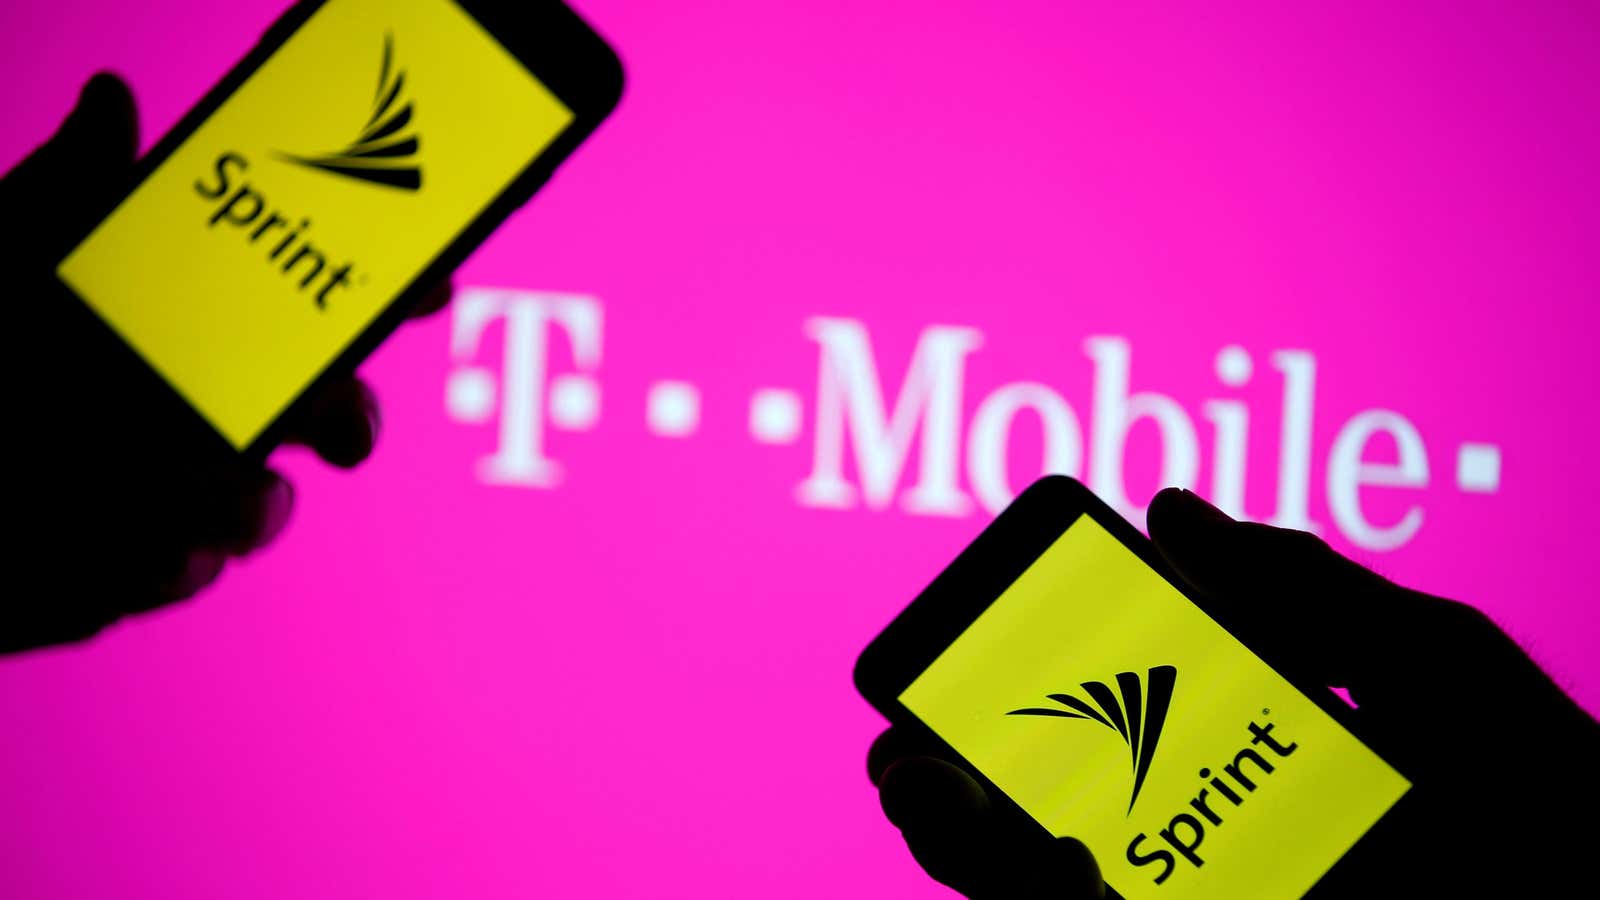 In April, Sprint and T-Mobile announced a $146 billion merger.